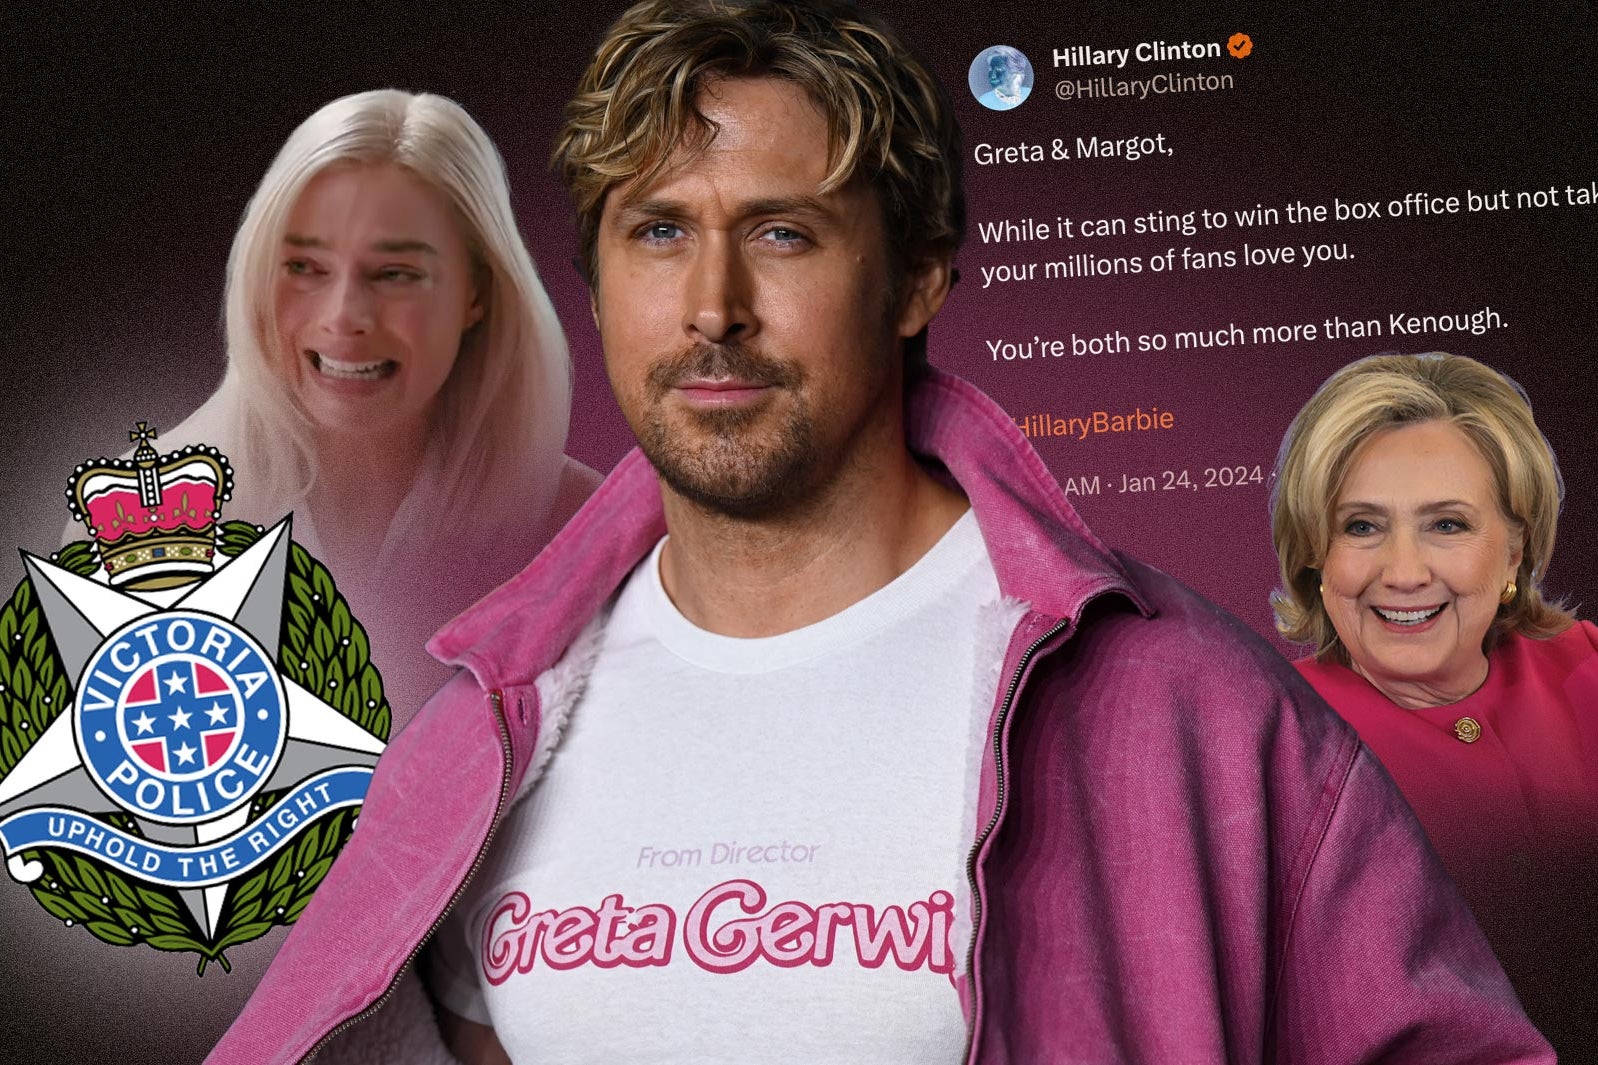 A collage. At the center, a photo of Ryan Gosling opening his pink fleece to reveal a T-shirt that says "From Director Greta Gerwig." On the right, a screengrab of a tweet from Hillary Clinton. On the left, the police seal for the state of Victoria. And finally, in the corner, a still of Margot Robbie crying.